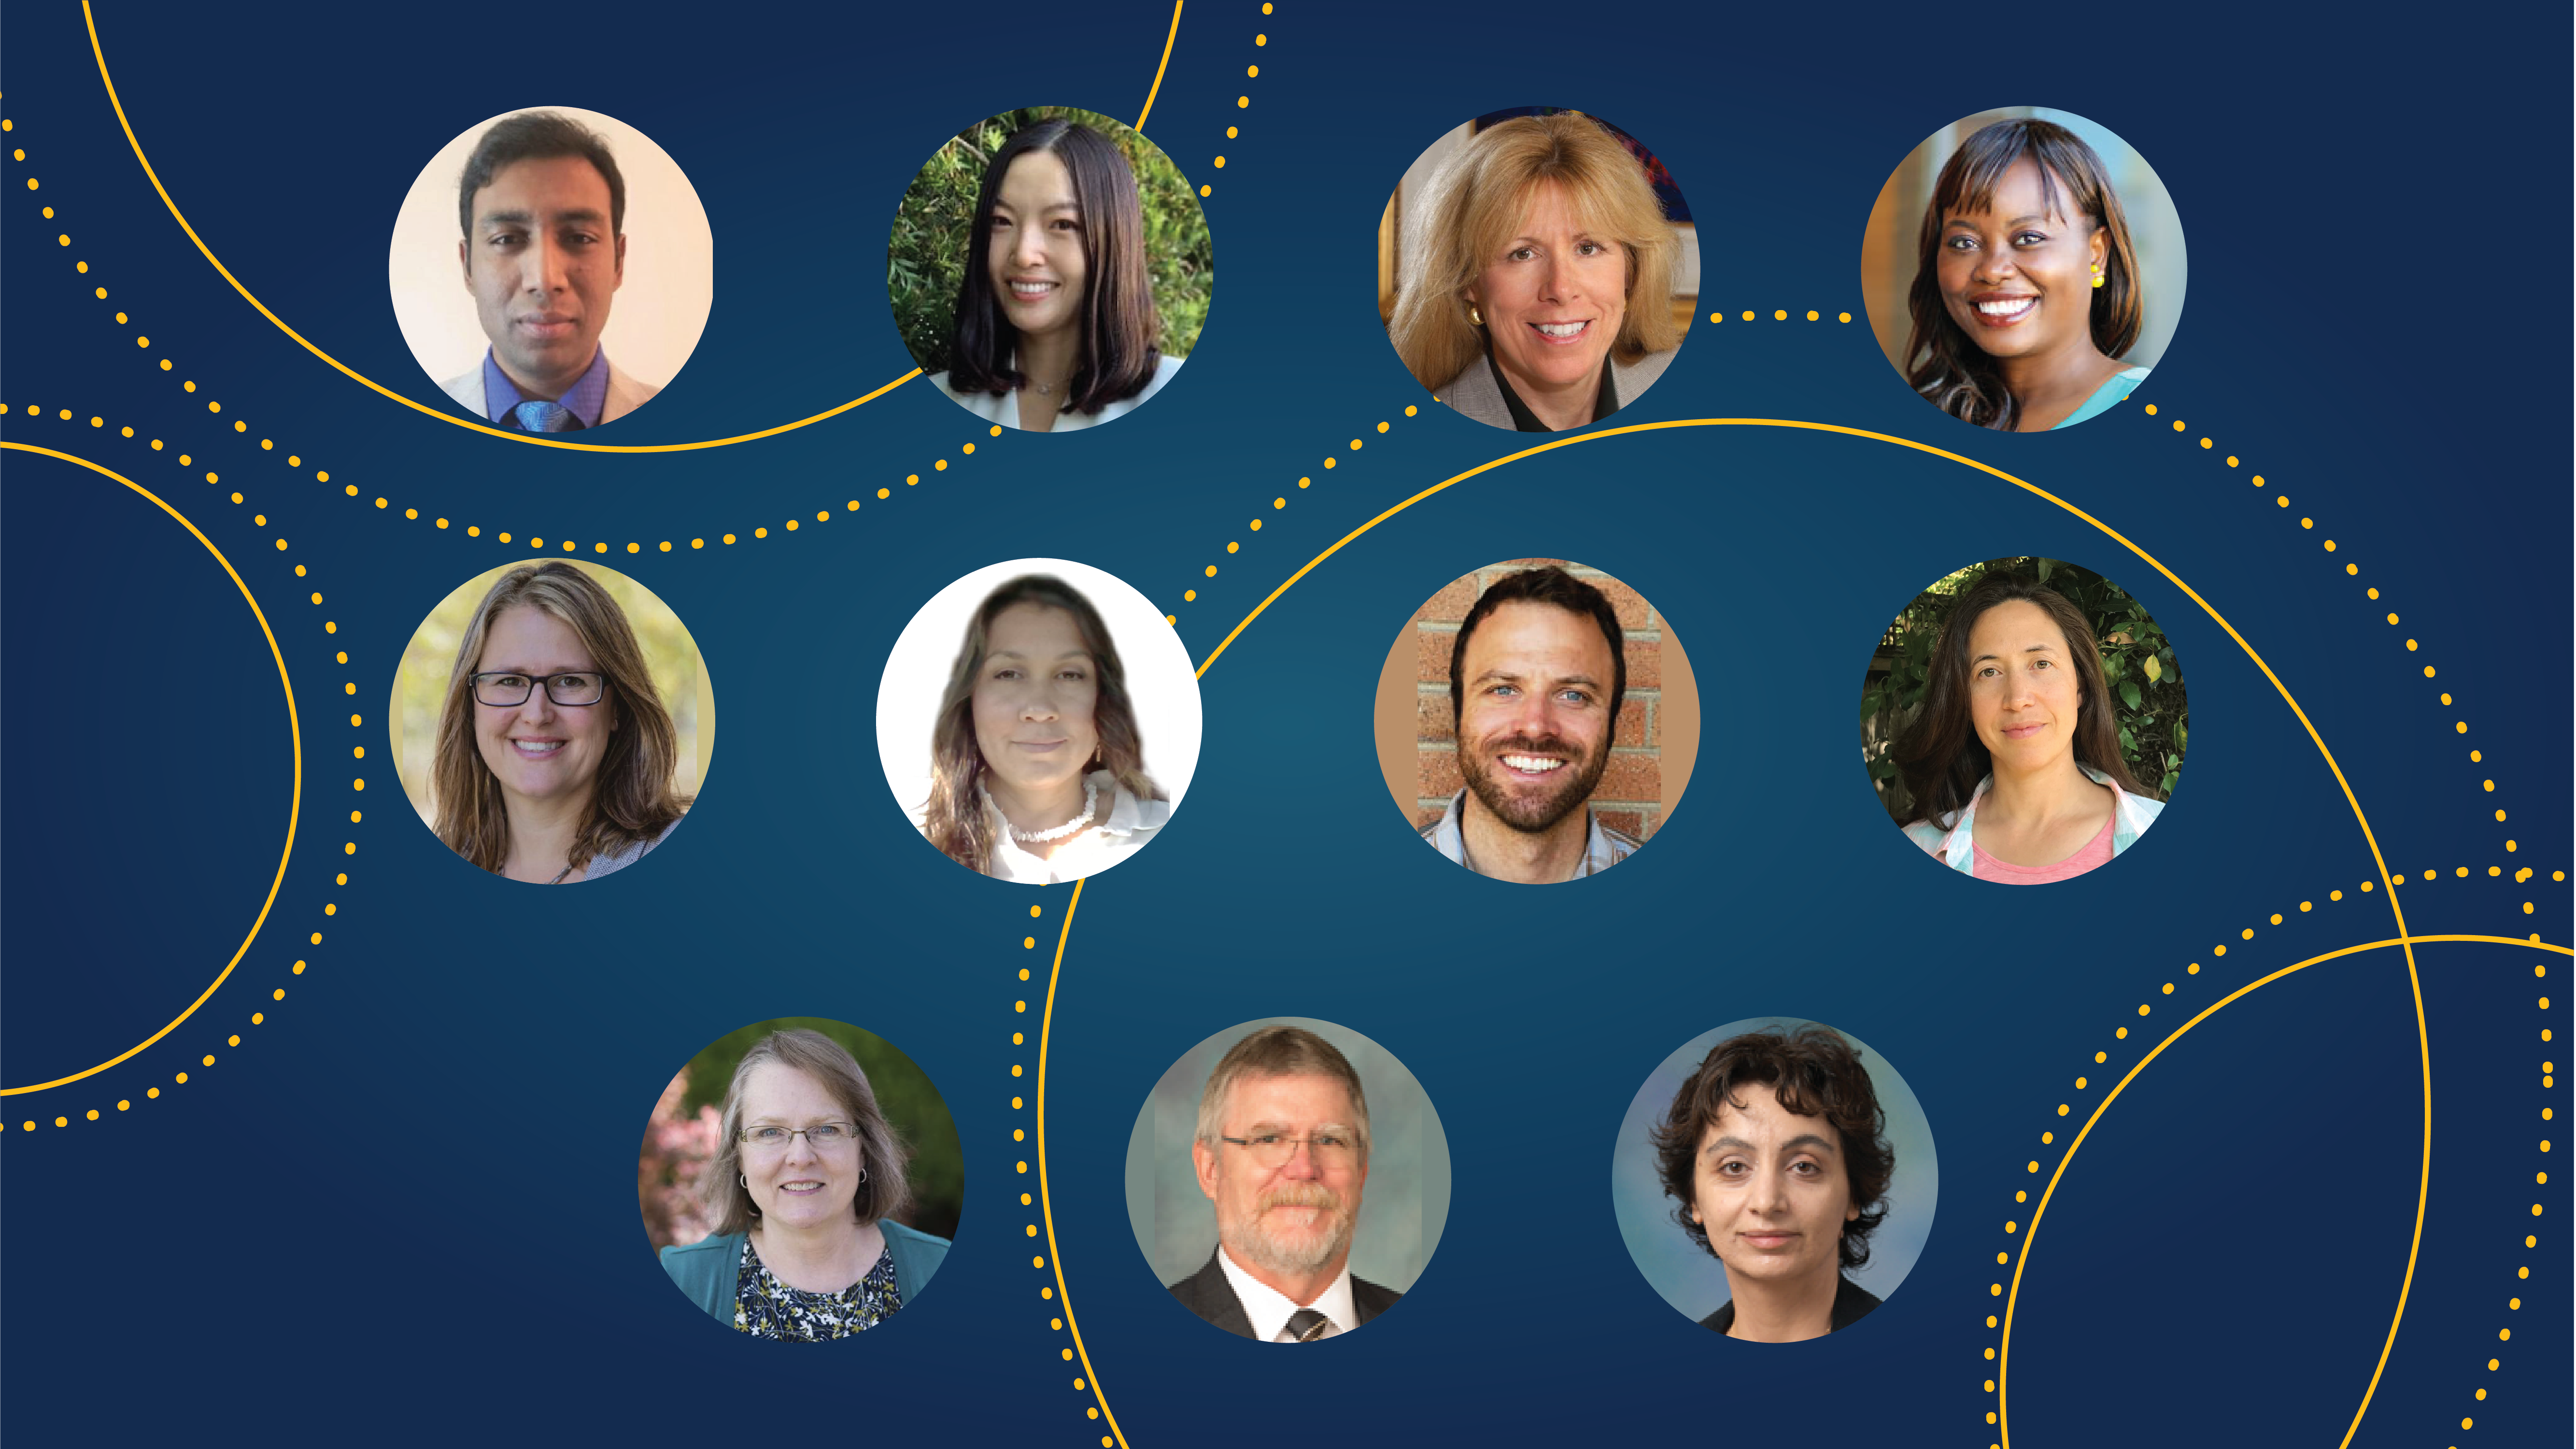 Photos in circles of 11 UC Davis faculty members who participated in the Curriculum Enhancement program in 2020-21 on a blue background.